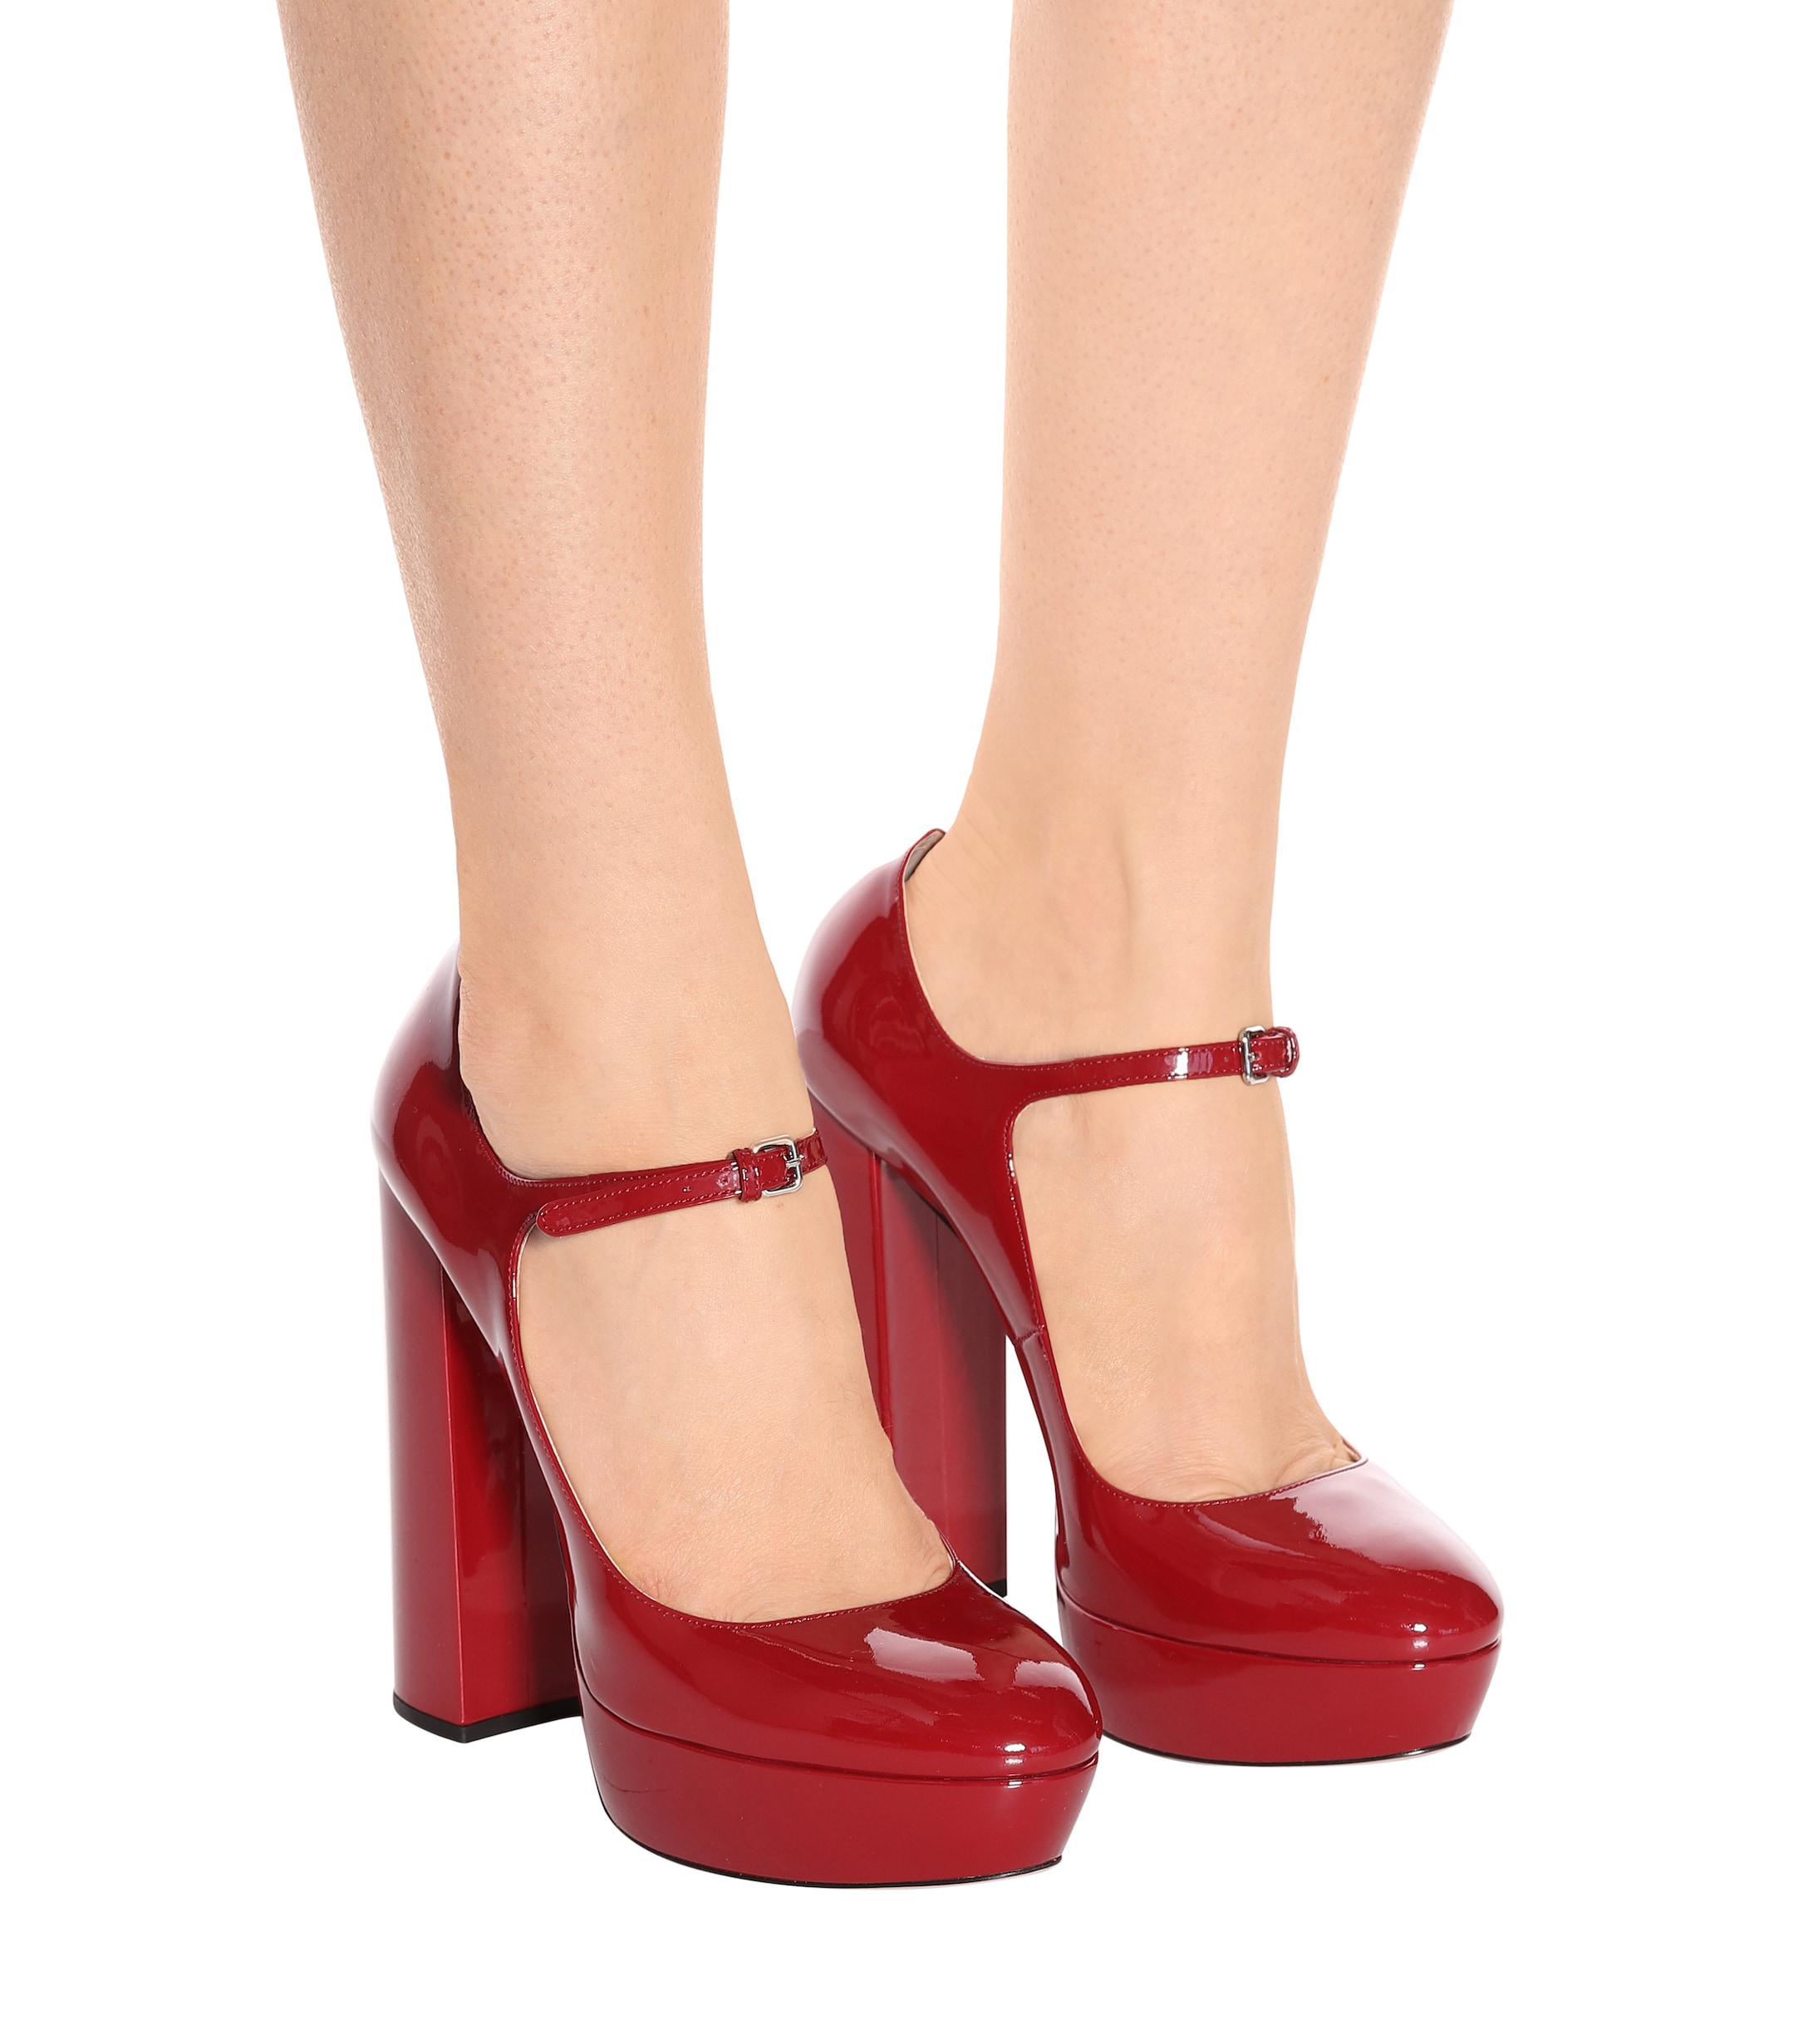 Miu Miu Mary Jane Patent Leather Pumps in Red | Lyst